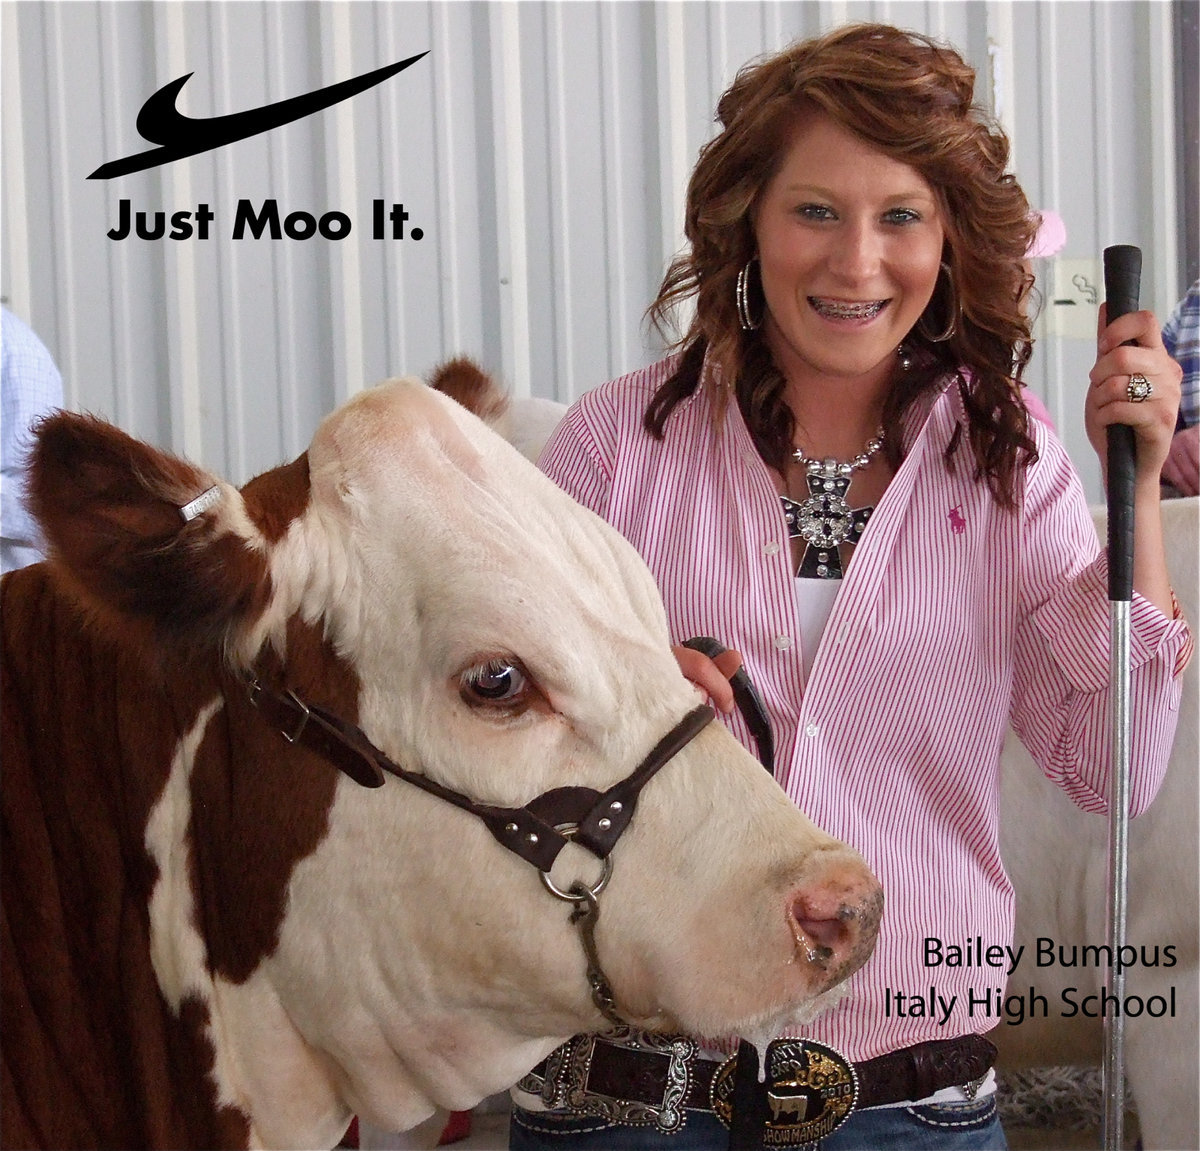 Image: Just Moo it. — Bailey Bumpus moments before entering the Ellis County Youth Expo show ring on Thursday.